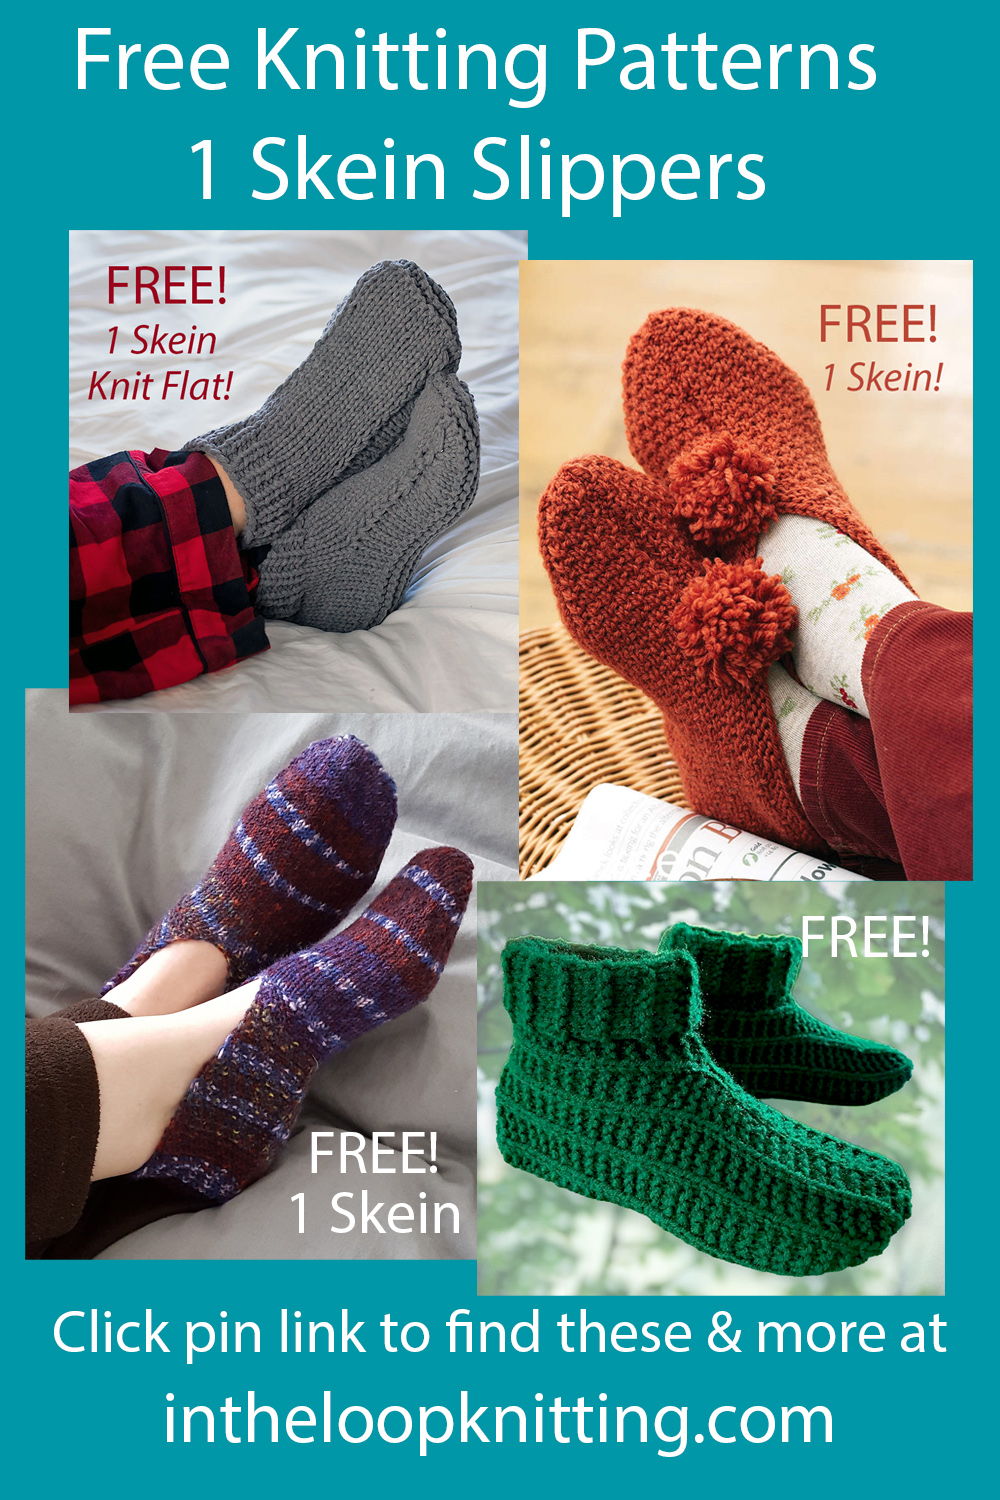 Free Slippers in One Skein Knitting Patterns. Knitting patterns for slippers knit with one skein of yarn. Many of the patterns are free.